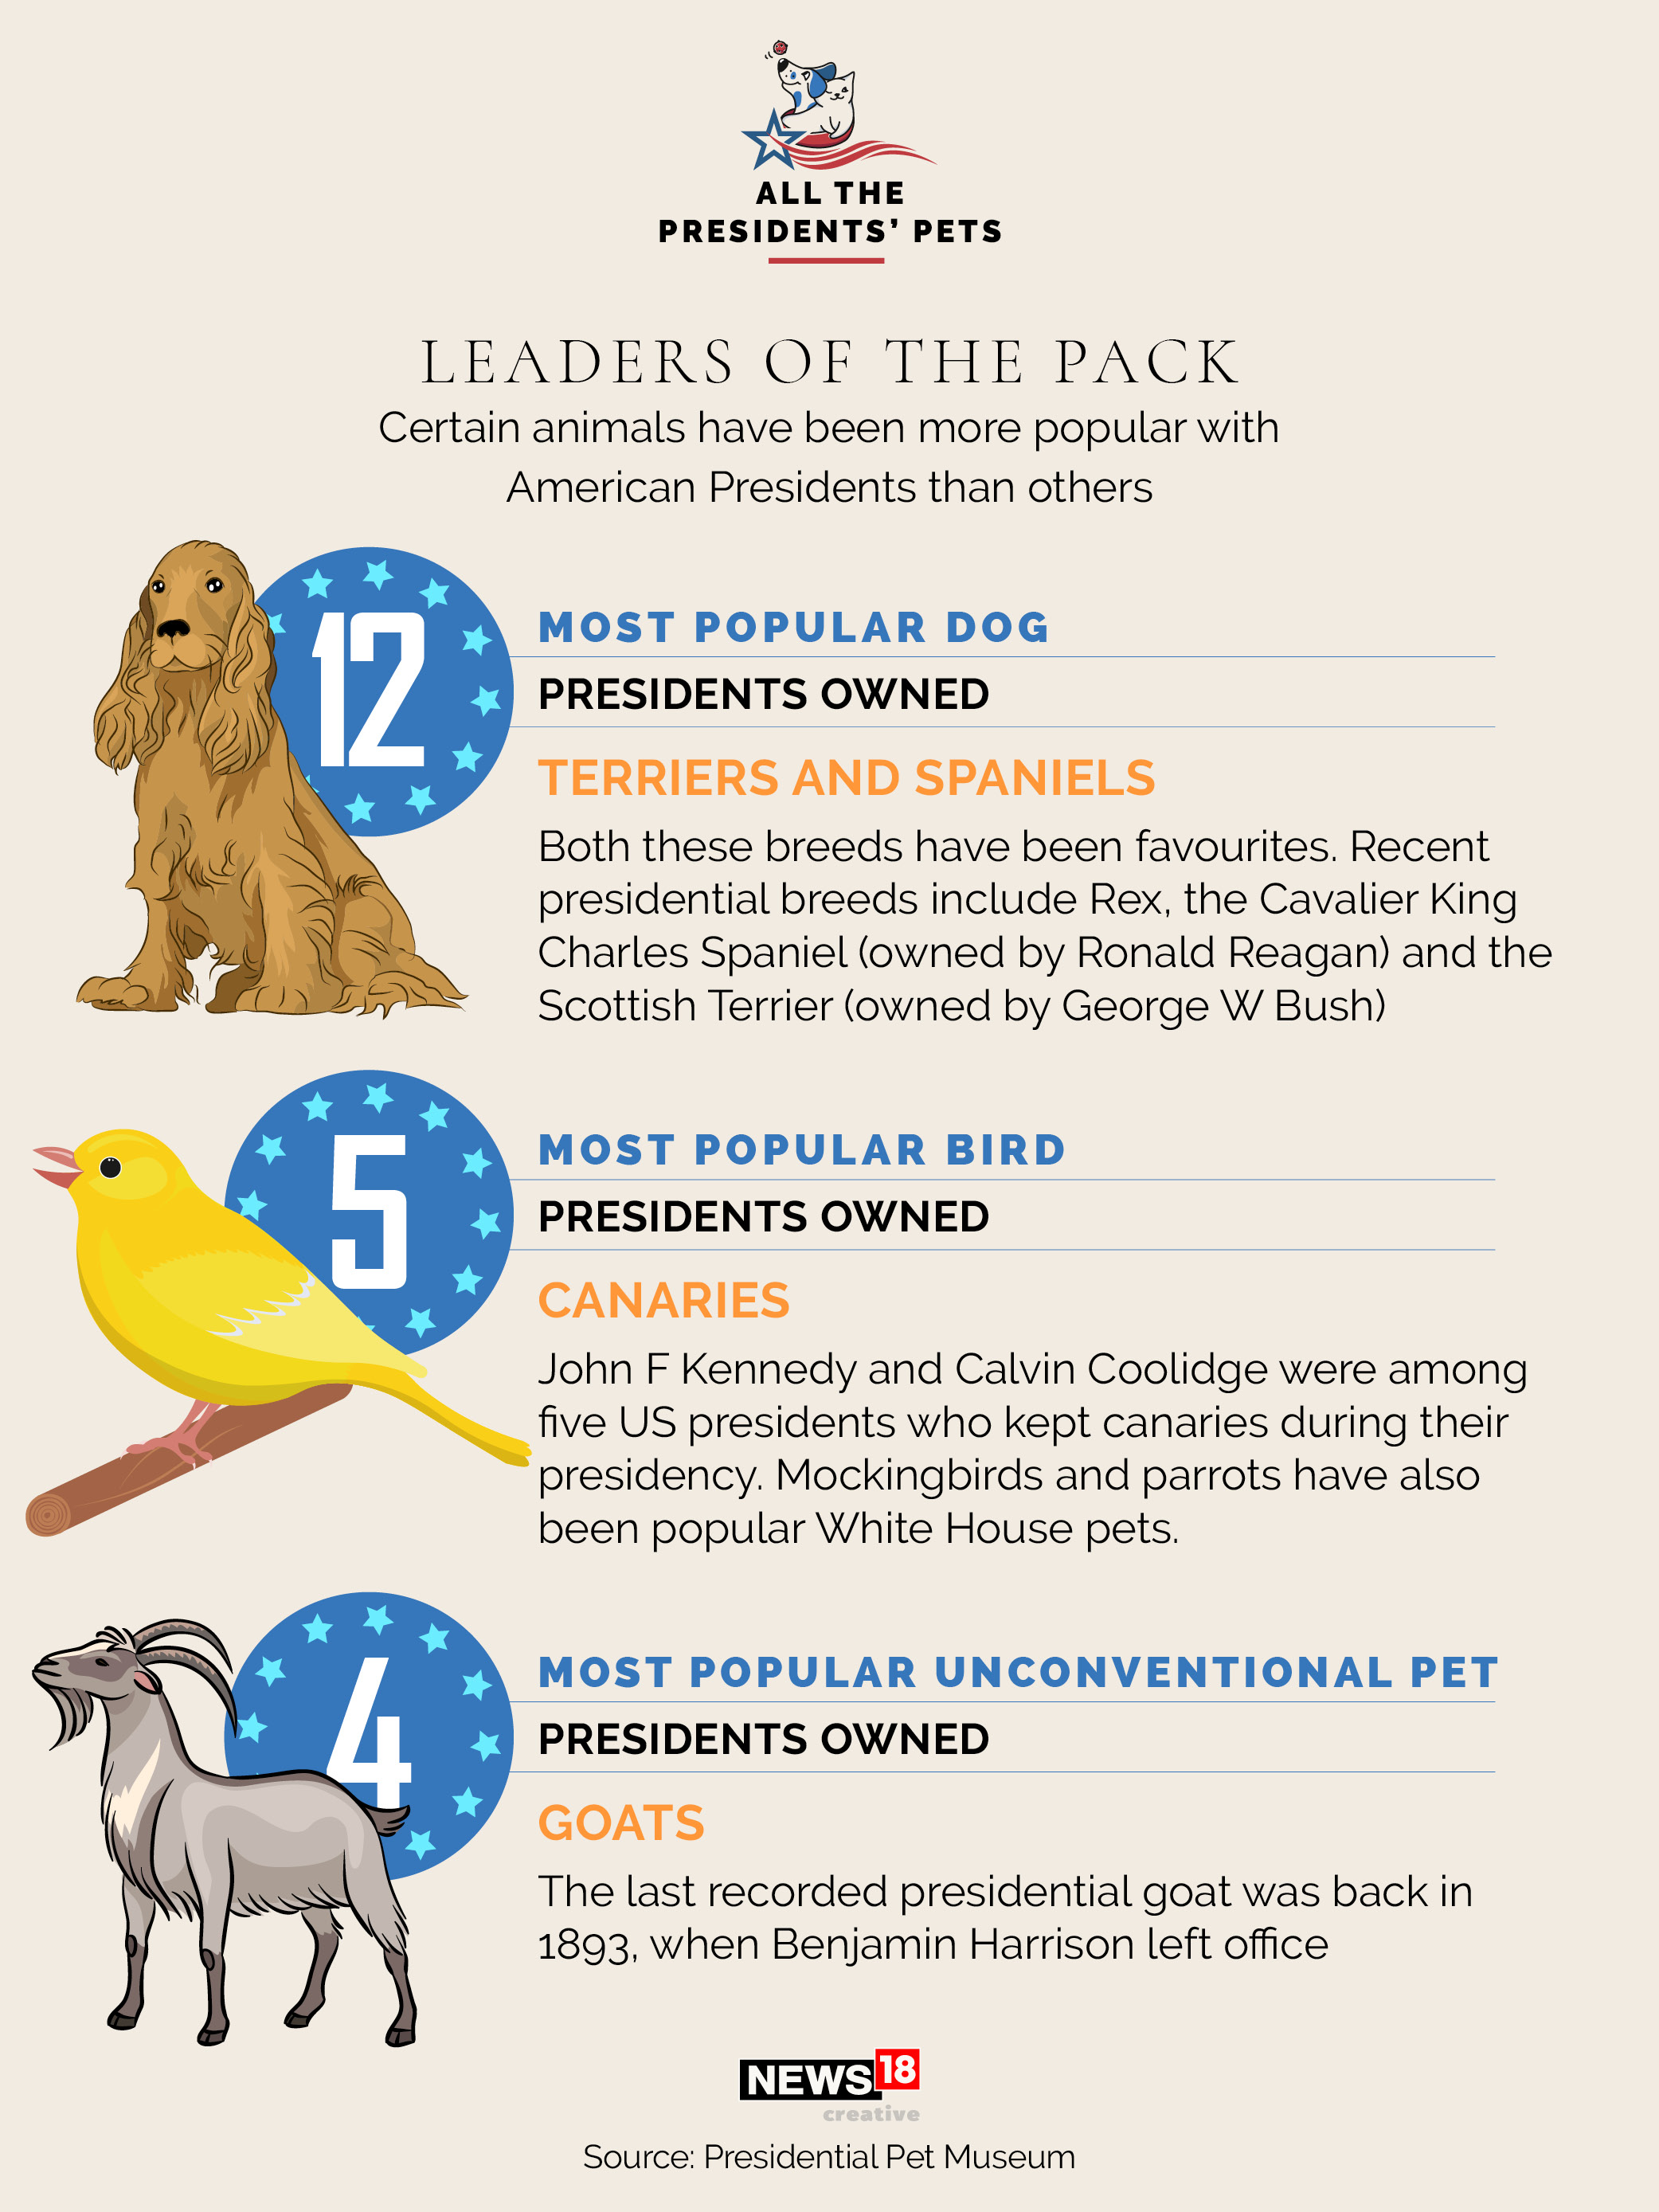 Champ, Major, and all the presidents' pets in US history